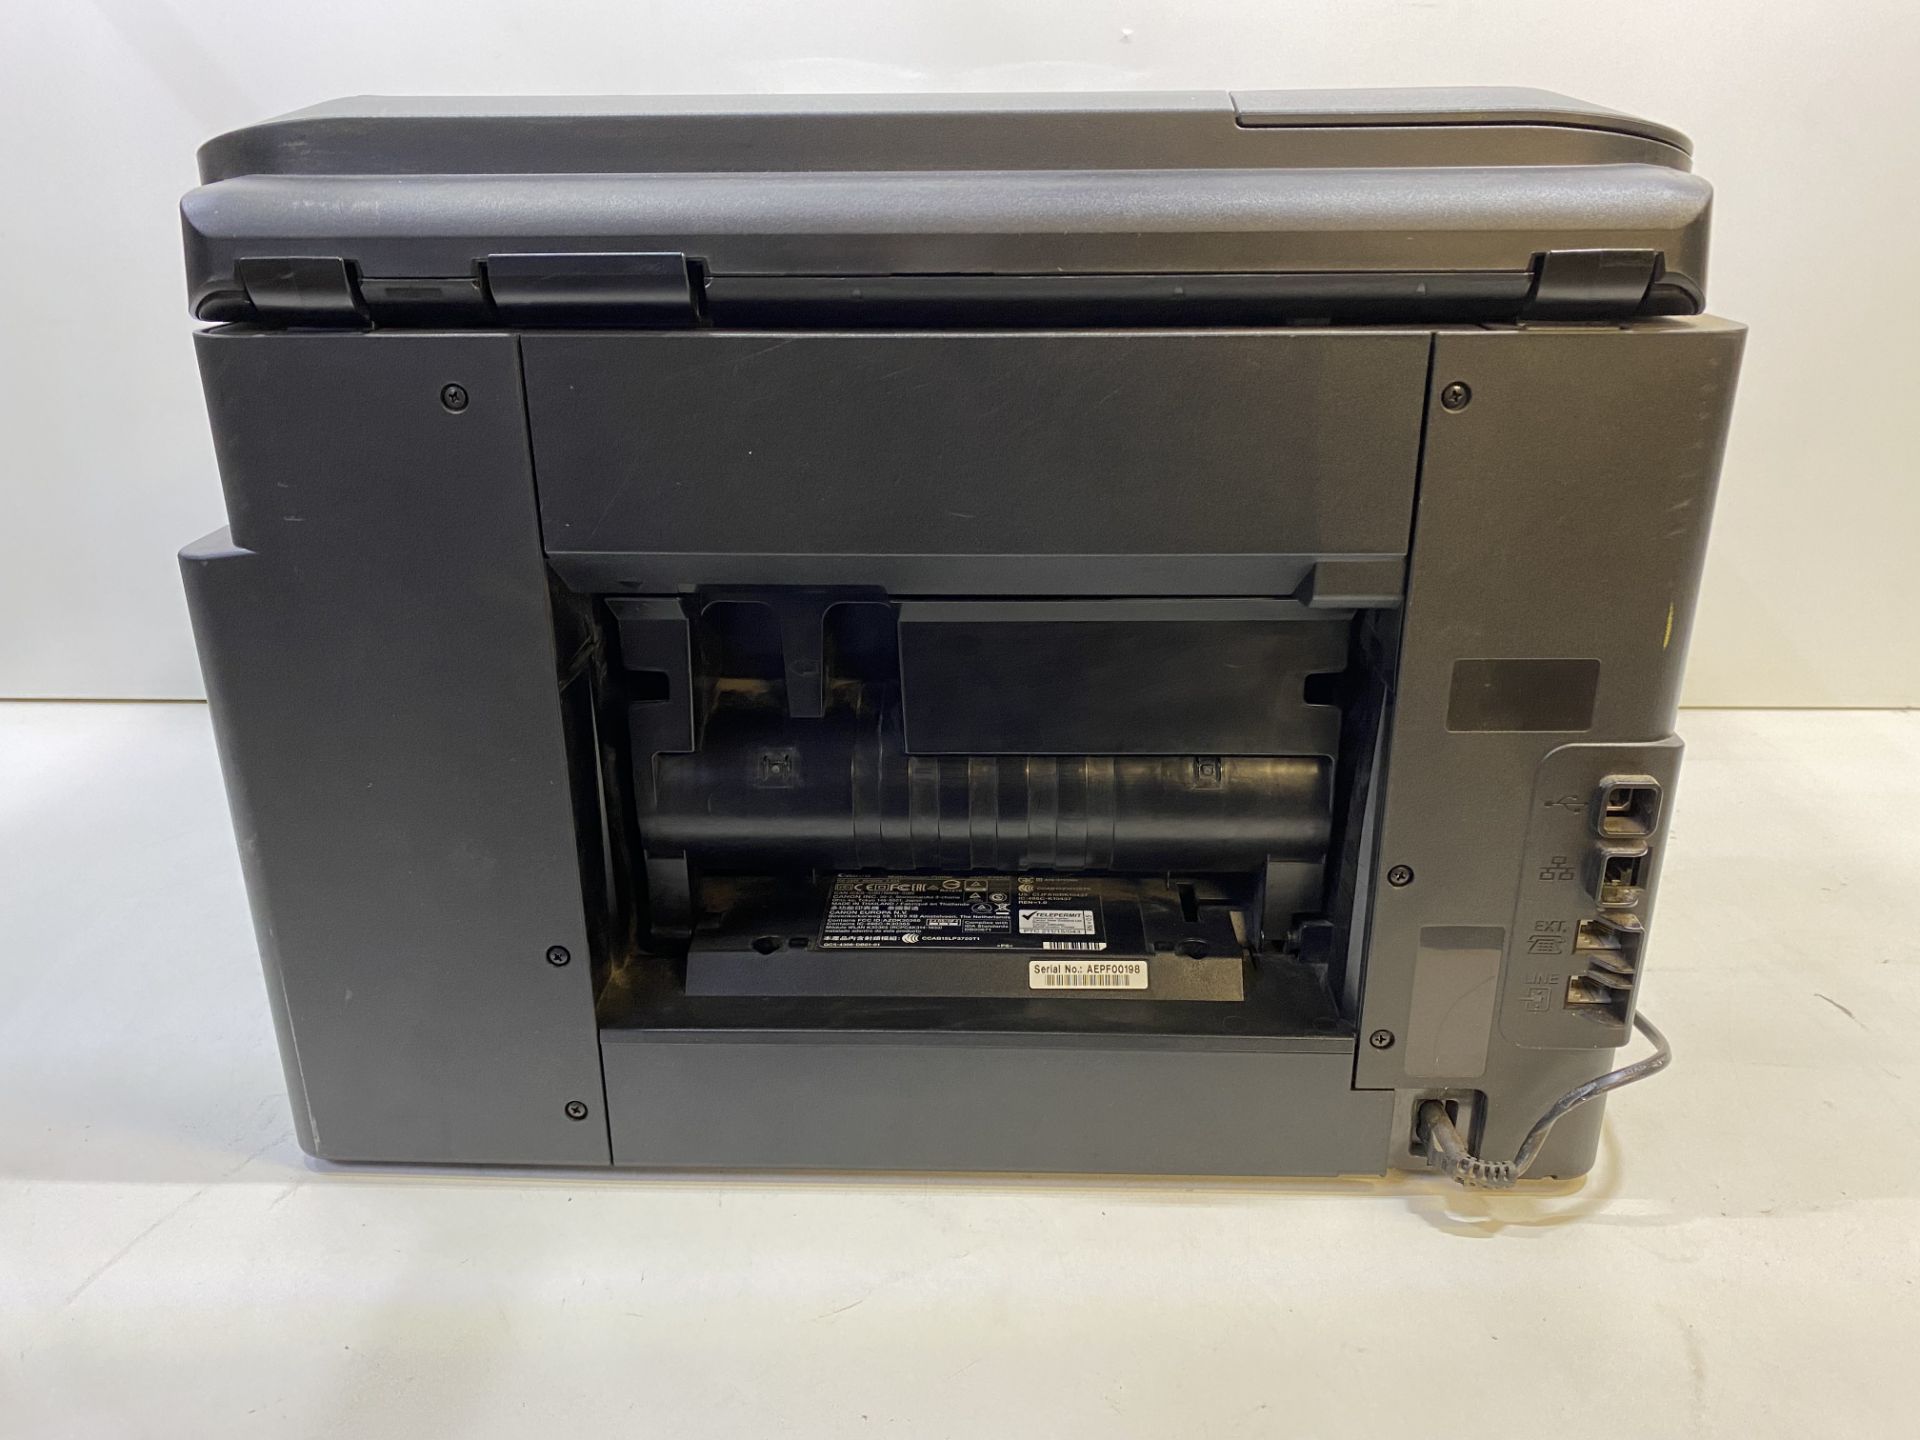 Canon MB5455 Multi-Functional Printer/Copier - Image 5 of 9